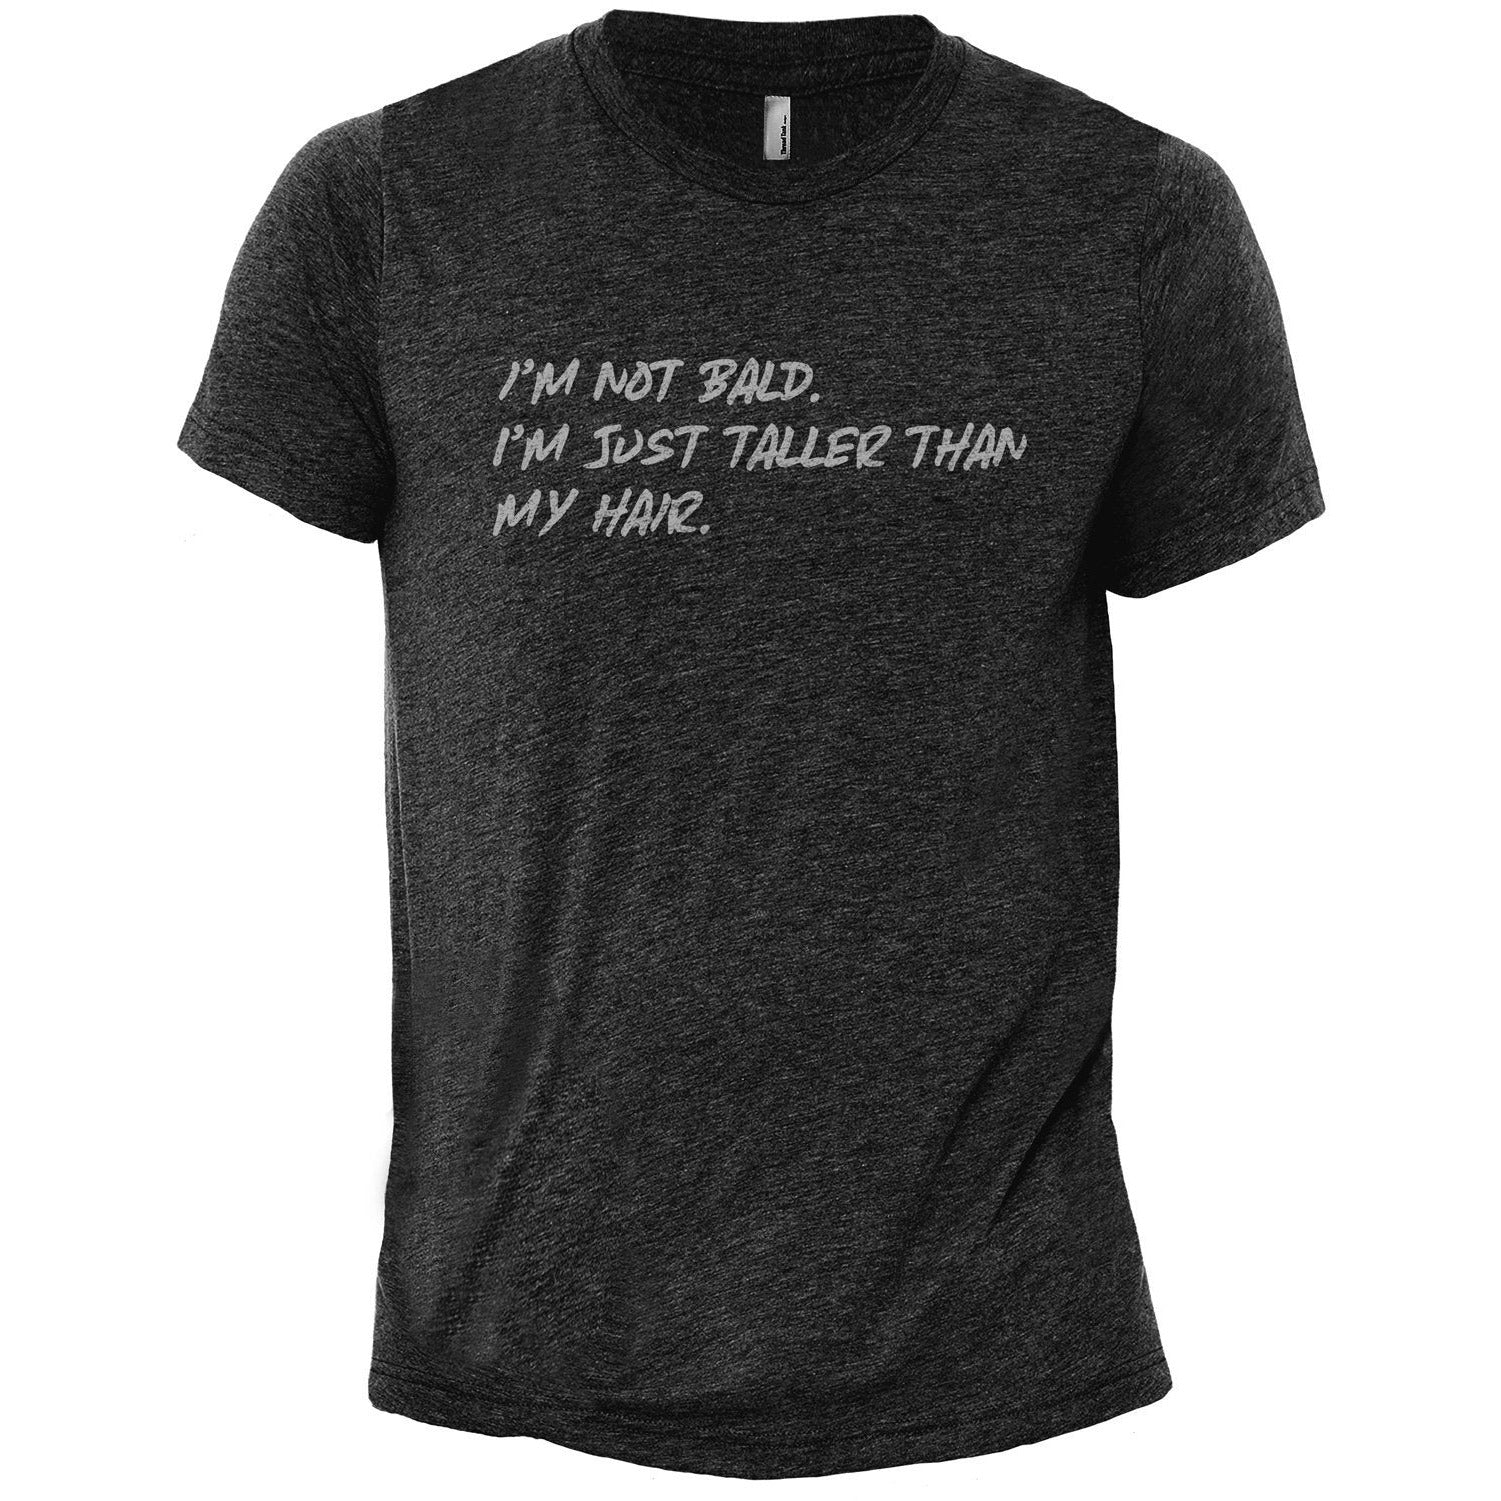 I'm Not Bald I'm Just Taller Than My Hair - Stories You Can Wear by Thread Tank